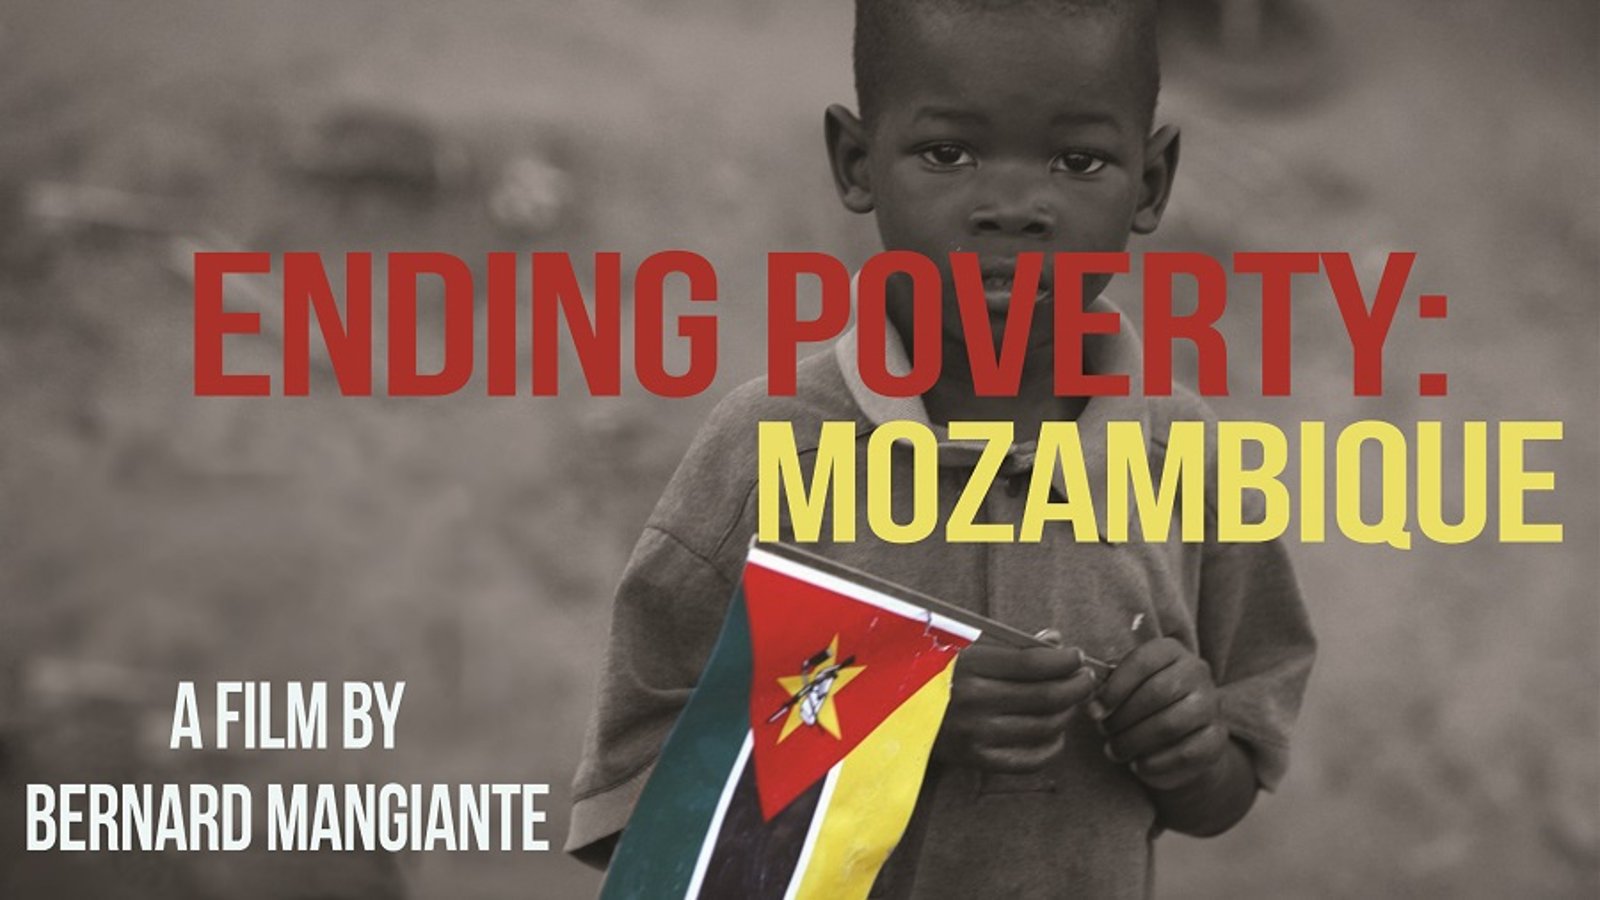 Mozambique: Ending Poverty - The United Nation's Plan to Eradicate Poverty